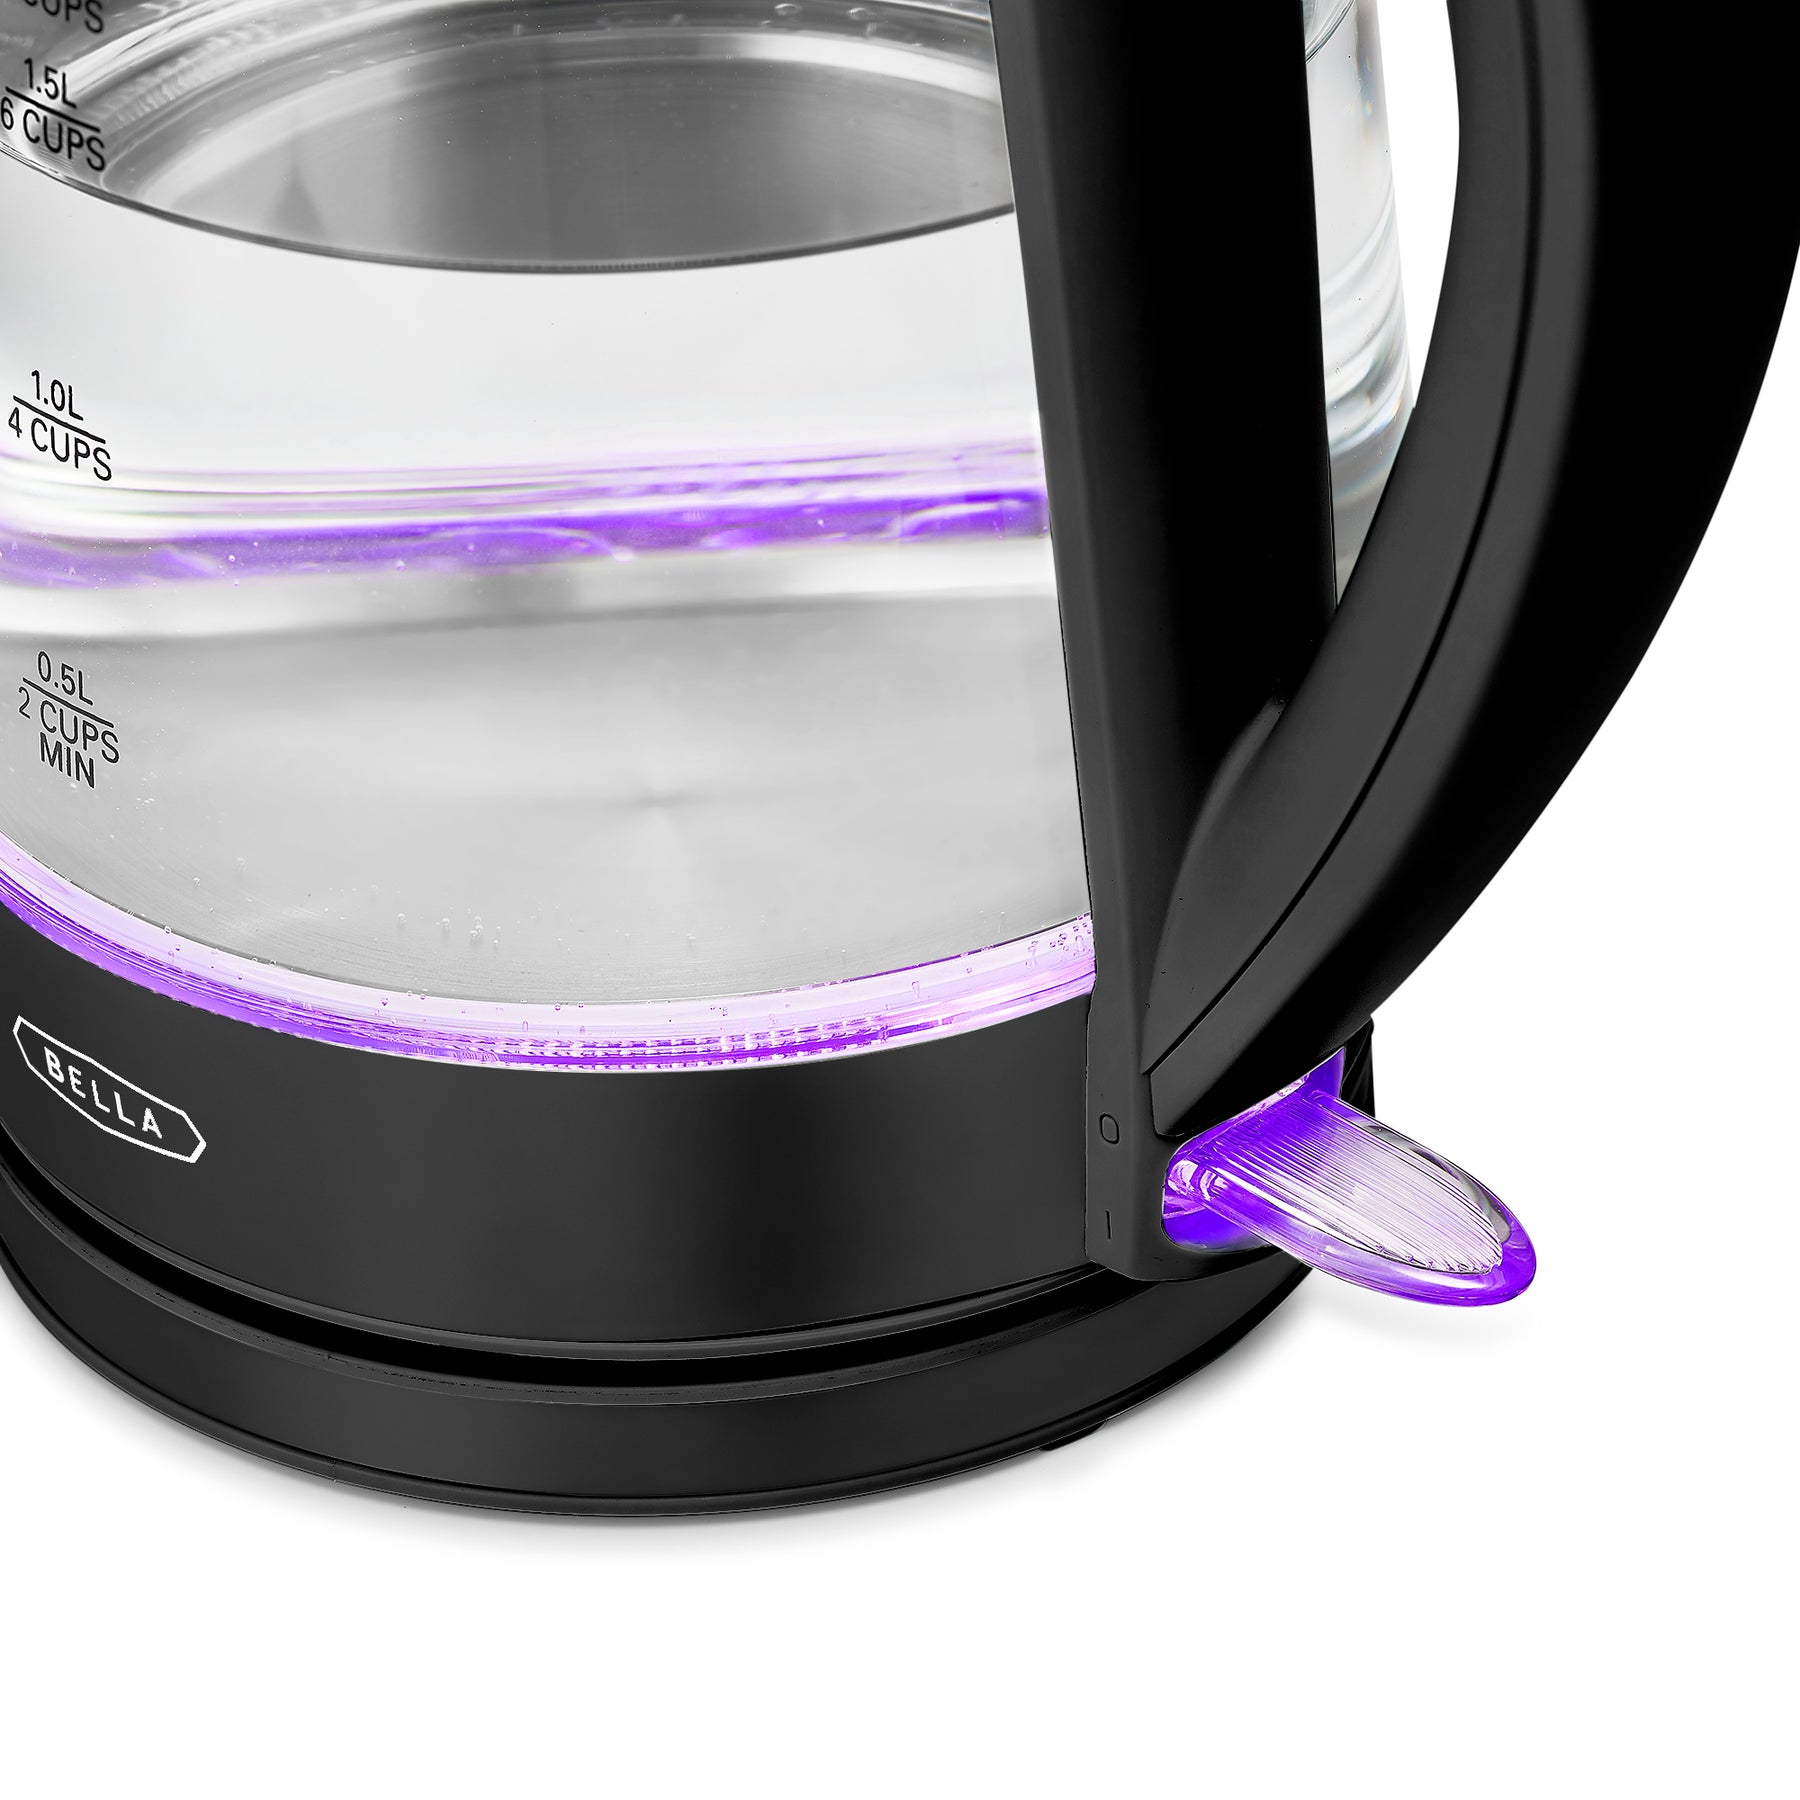 BELLA 1.7 Liter Glass Electric Kettle, Quickly Boil 7 Cups of Water in 6-7  Minutes, Soft Purple LED Lights Illuminate While Boiling, Cordless Portable